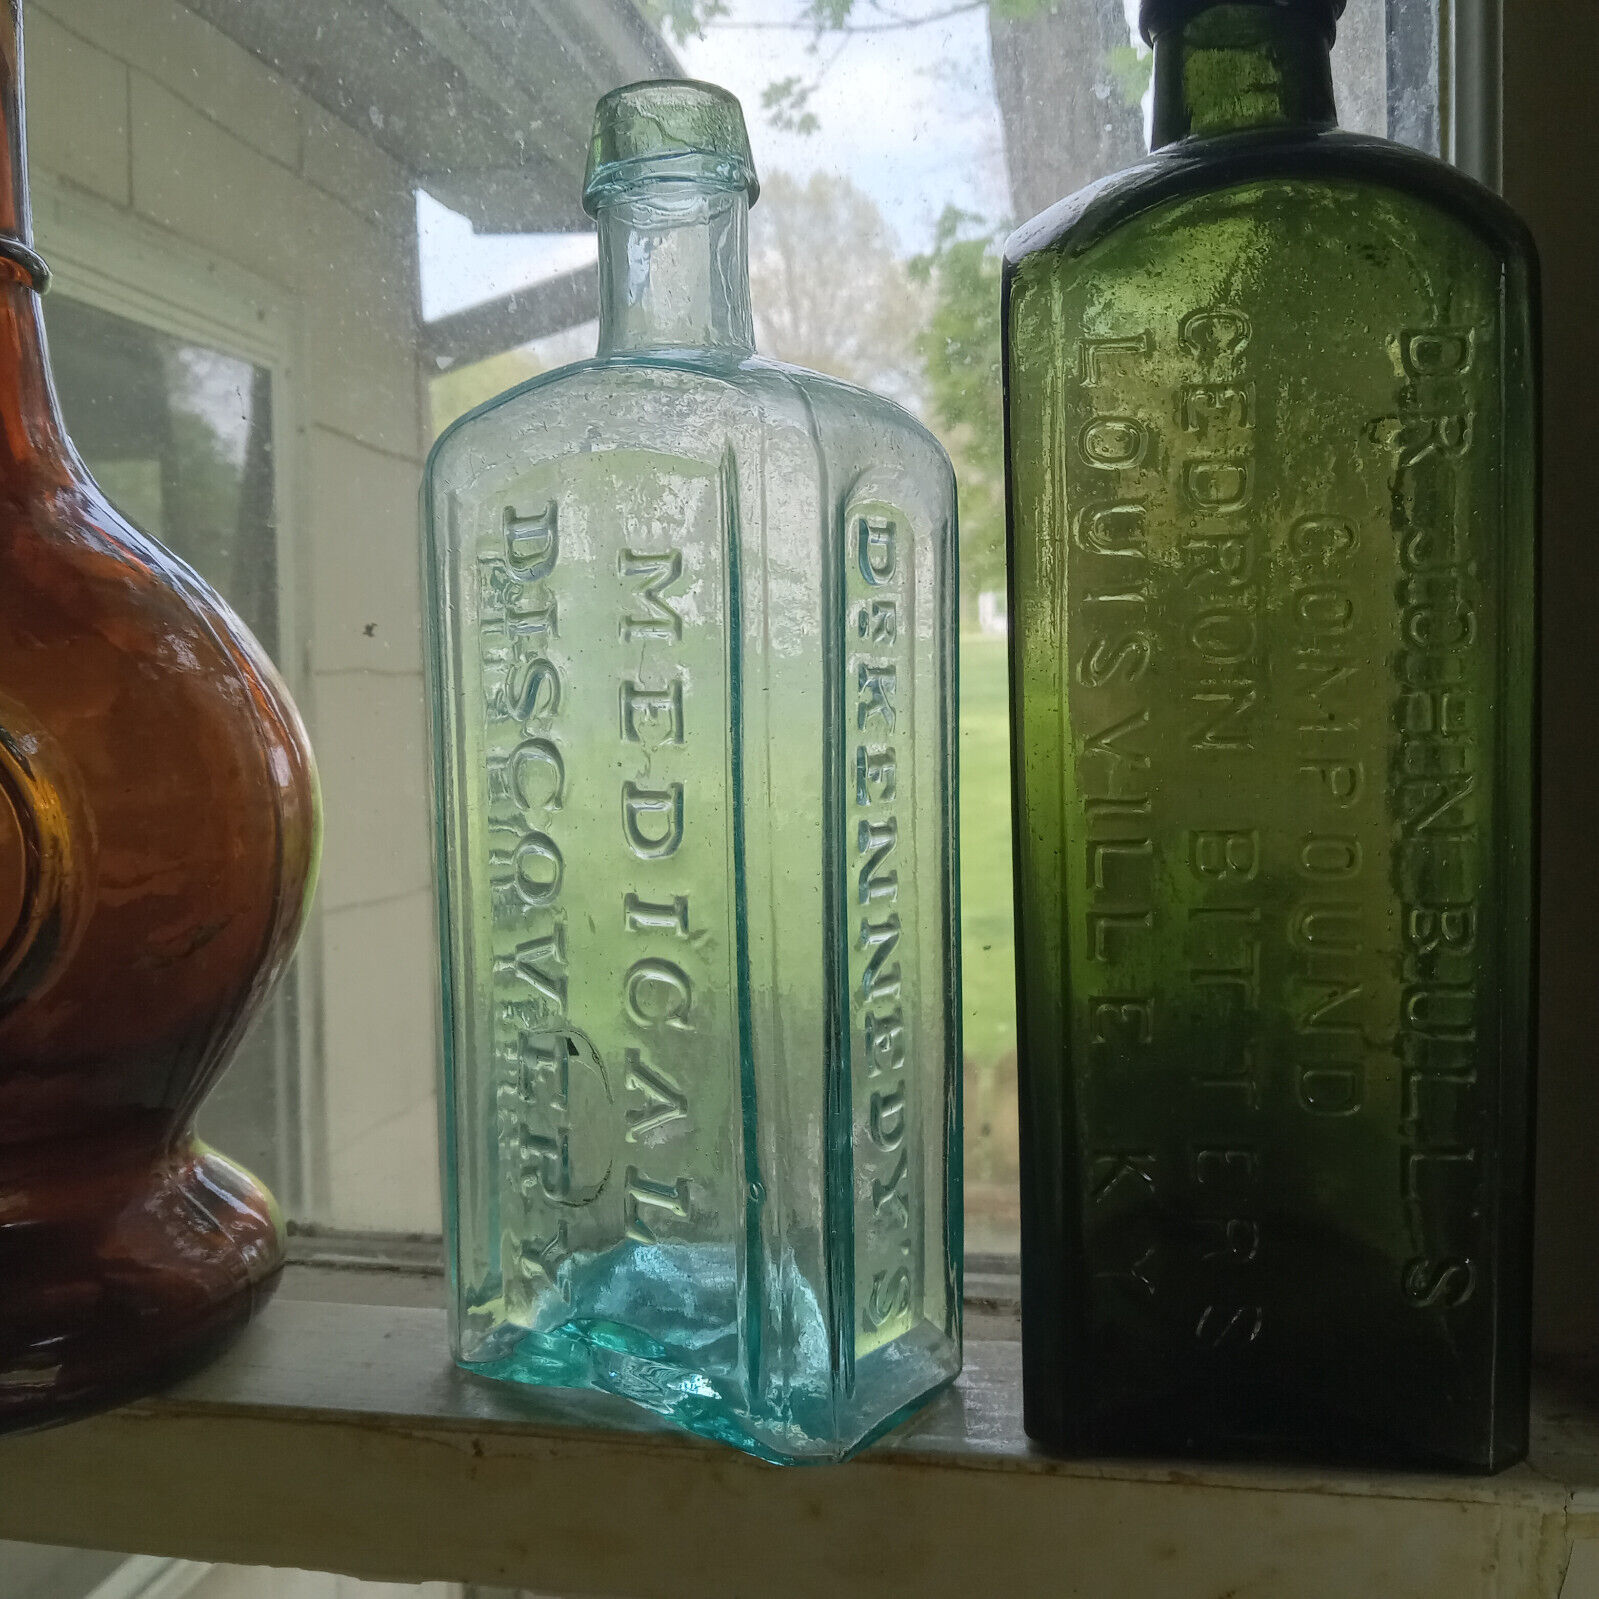 OPEN PONTIL DR.KENNEDY'S MEDICAL DISCOVERY ROXBURY,MASS 1850s CRUDE MED BOTTLE